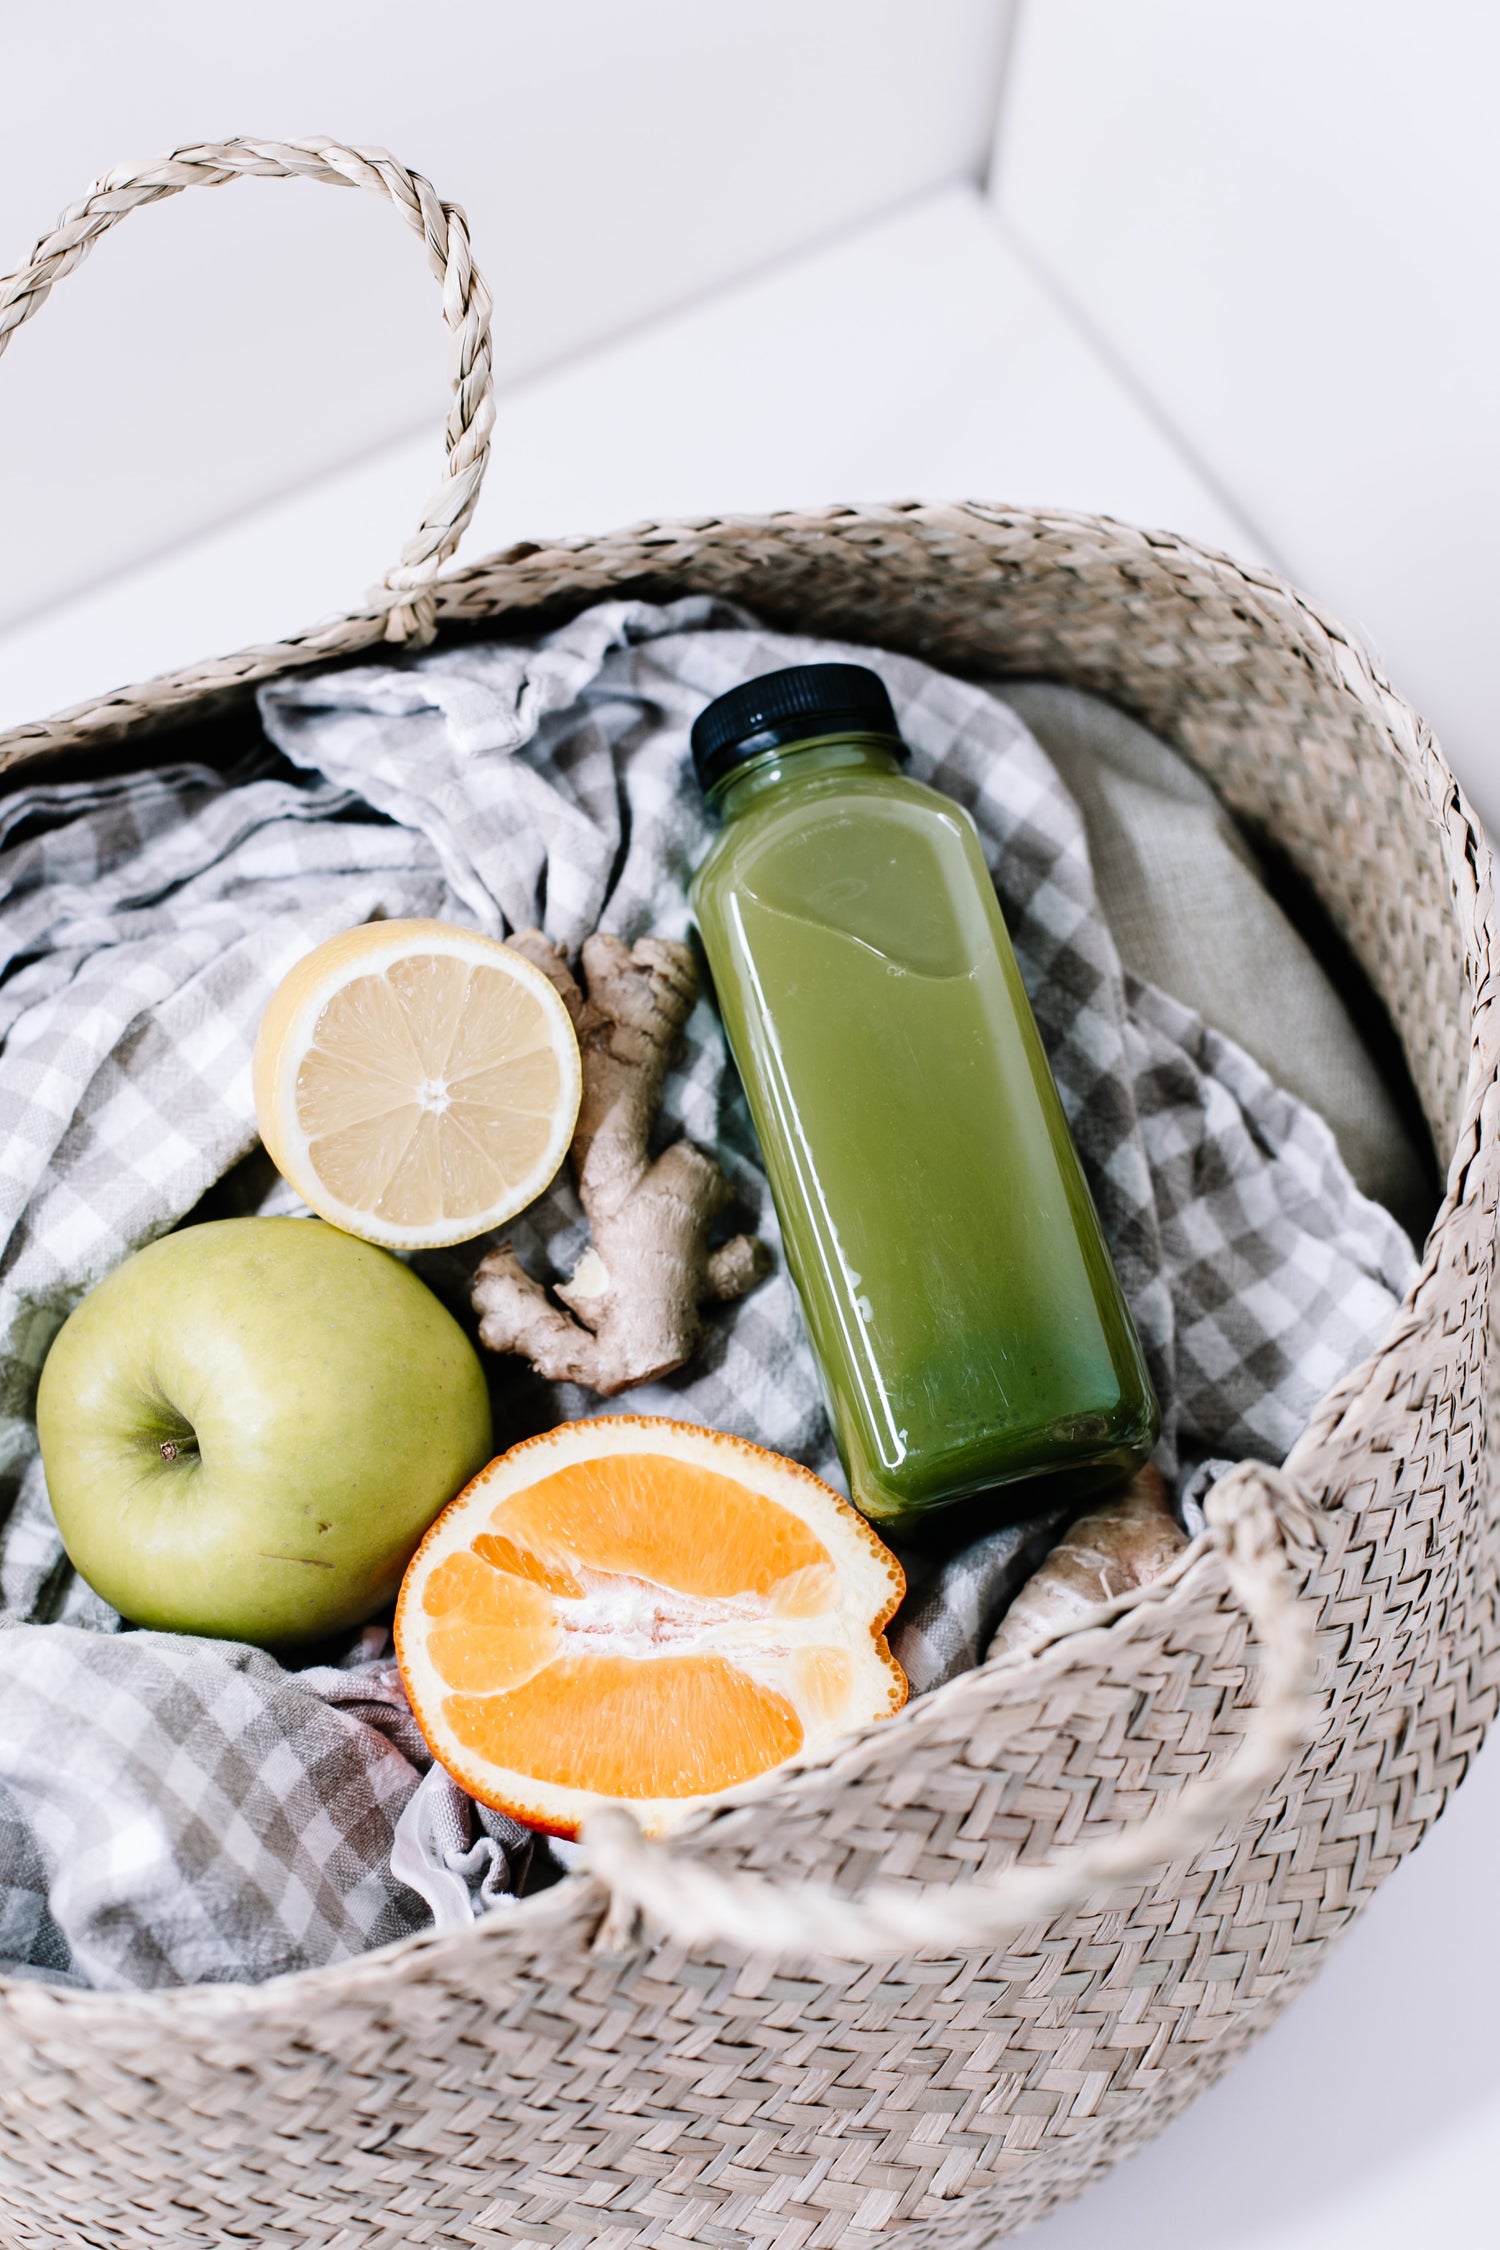 One Simple Way To Help You Detox & Boost Health During Holidays